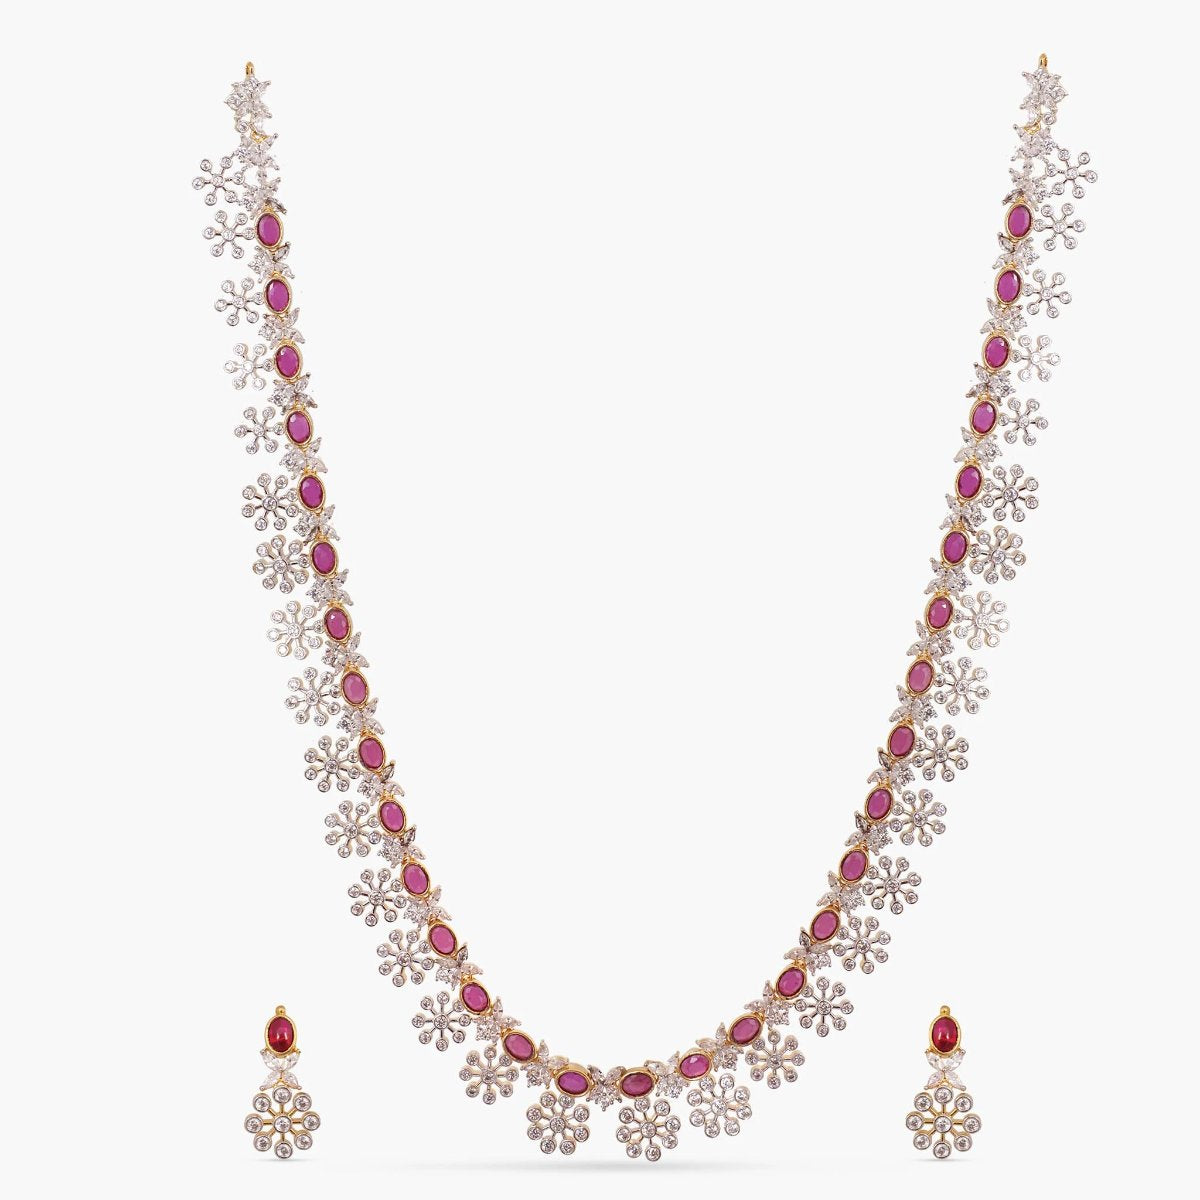 A picture of an Indian artificial necklace and earring set, featuring a gold plated necklace with red gemstones and Cubic Zirconia